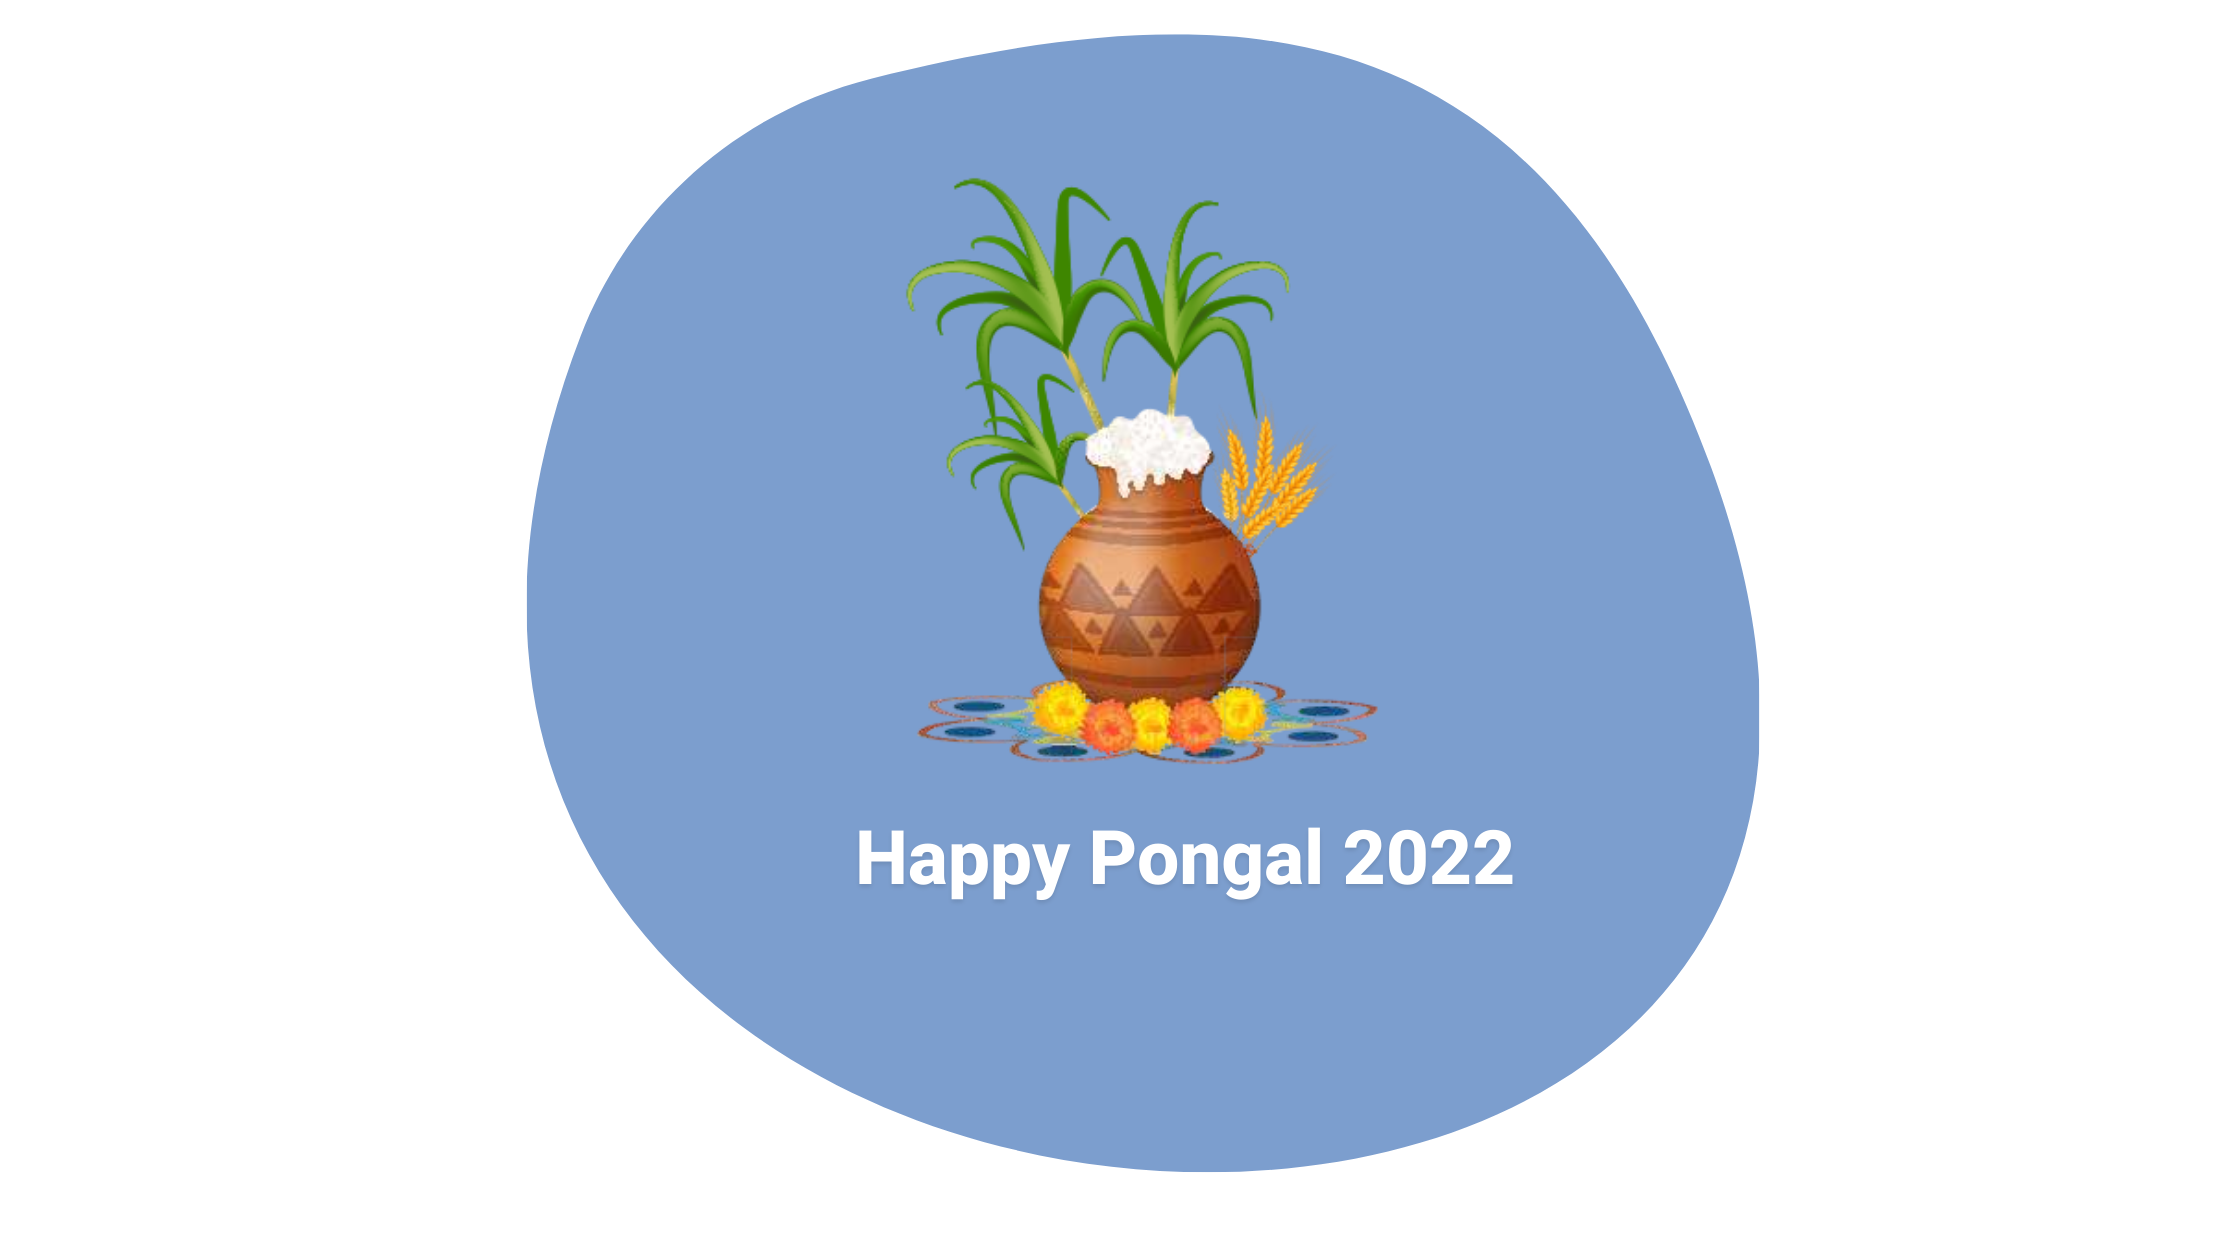 Pongal is a four-day-long harvest festival celebrated every month of Thai (January to February) by Indian